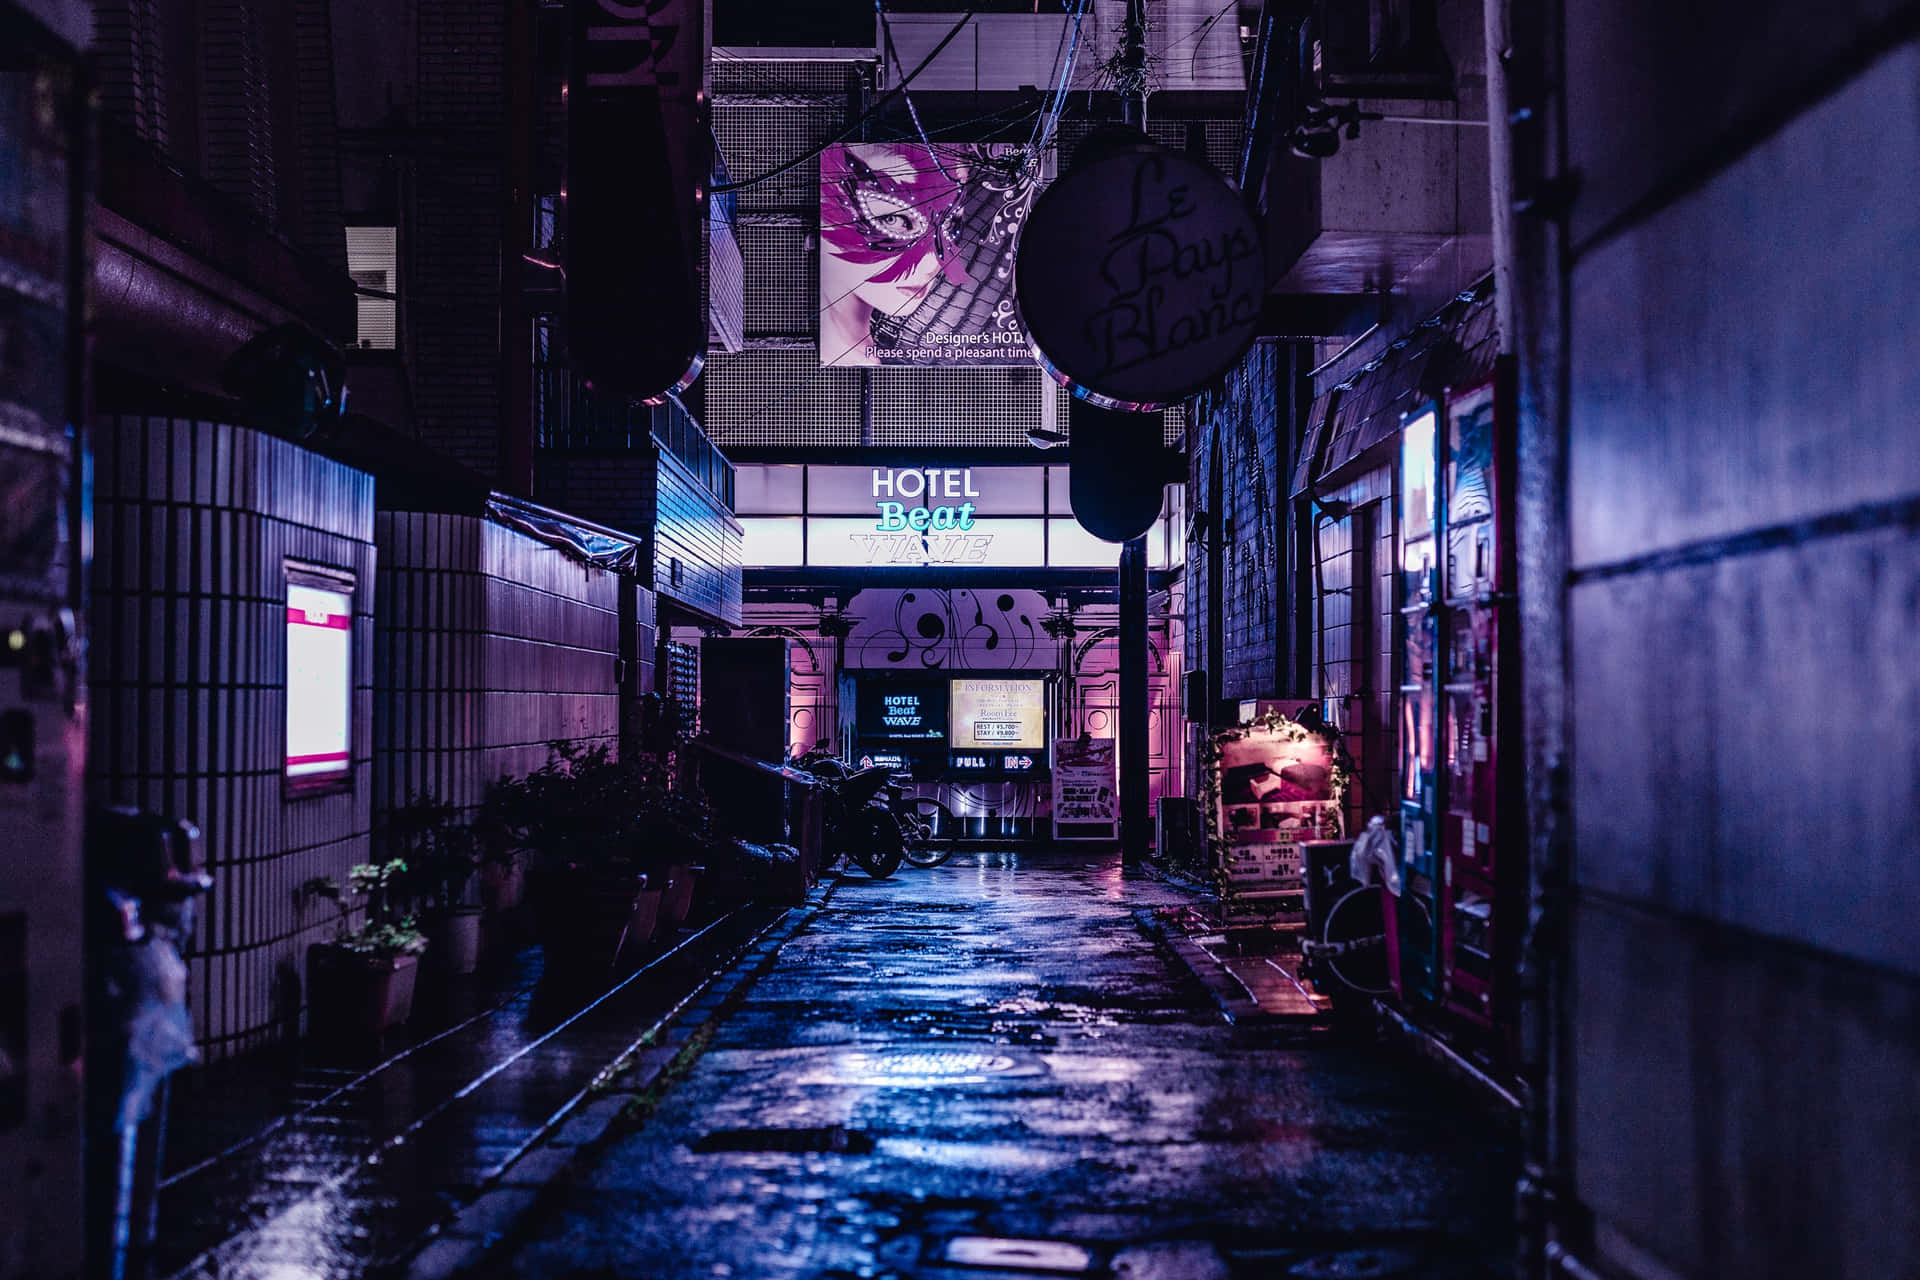 An alleyway in the city at night Wallpaper